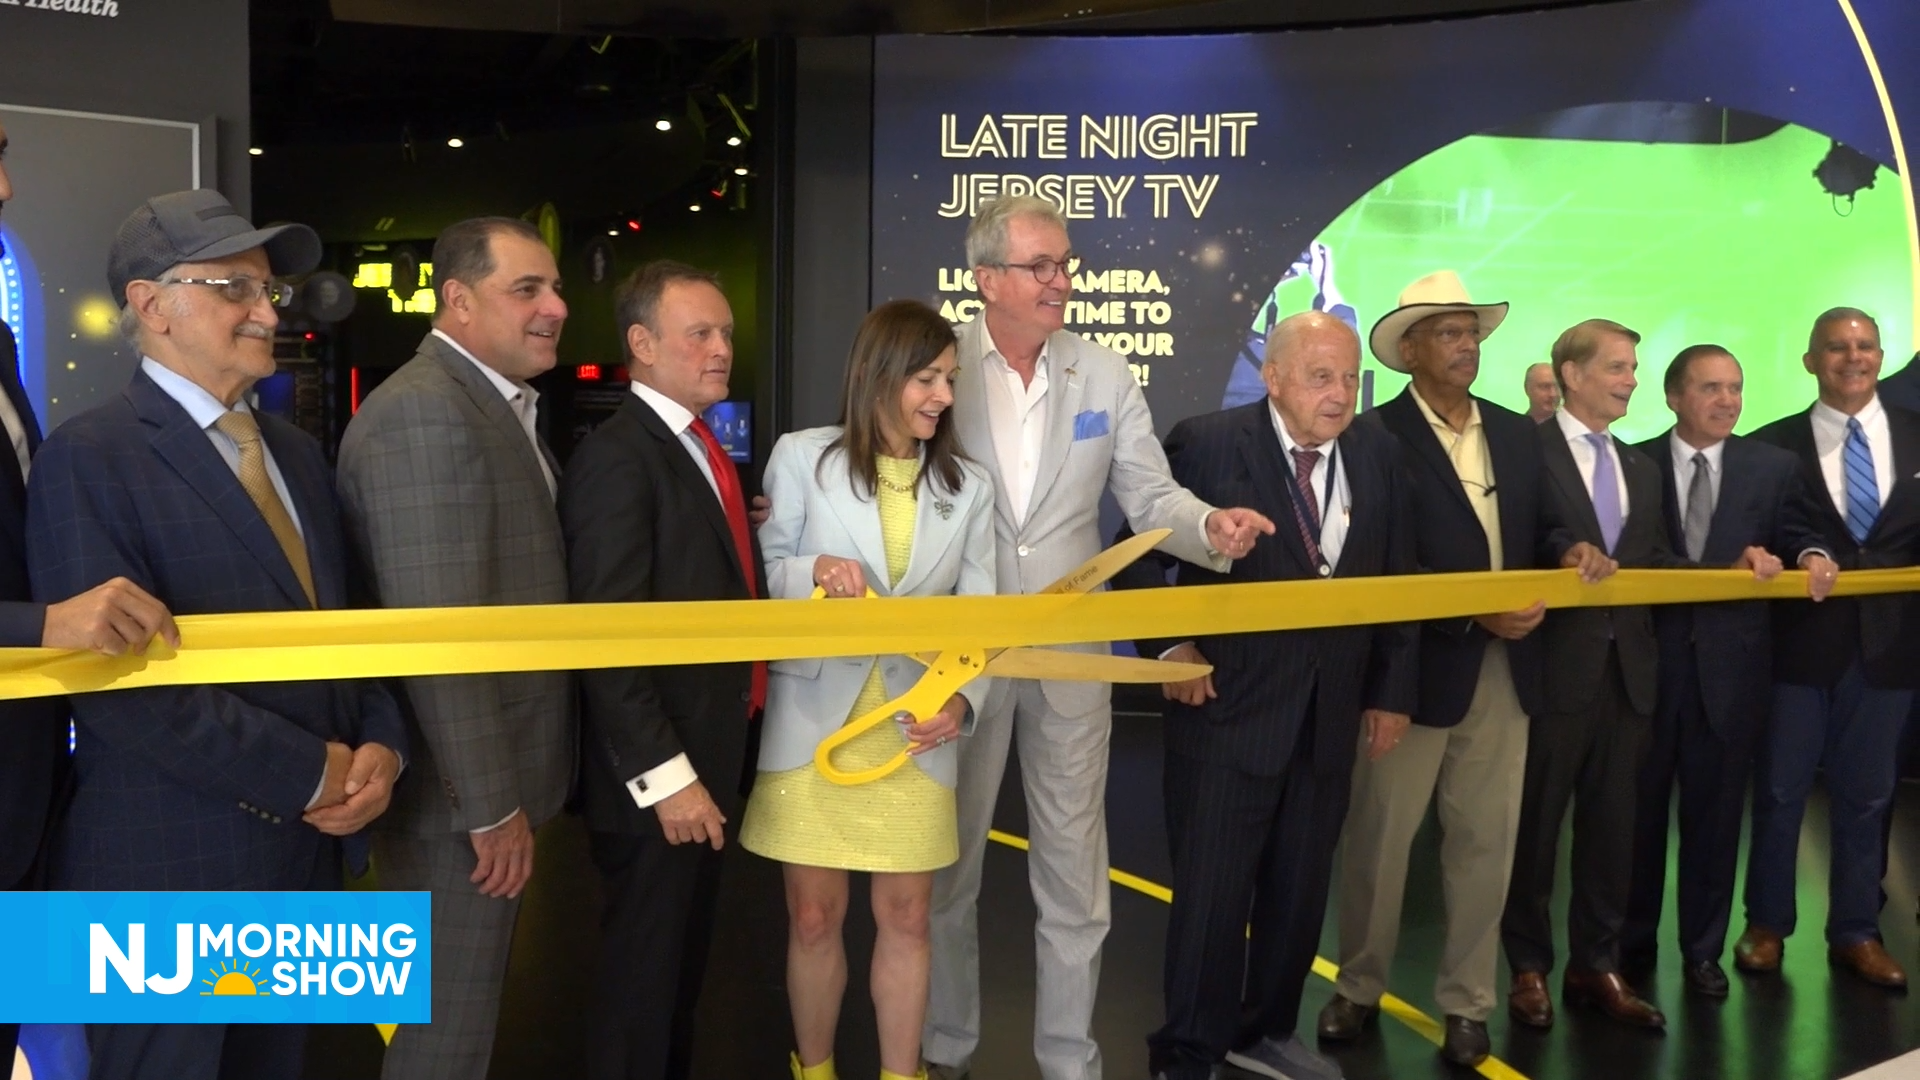 New Jersey Hall of Fame Ribbon Cutting